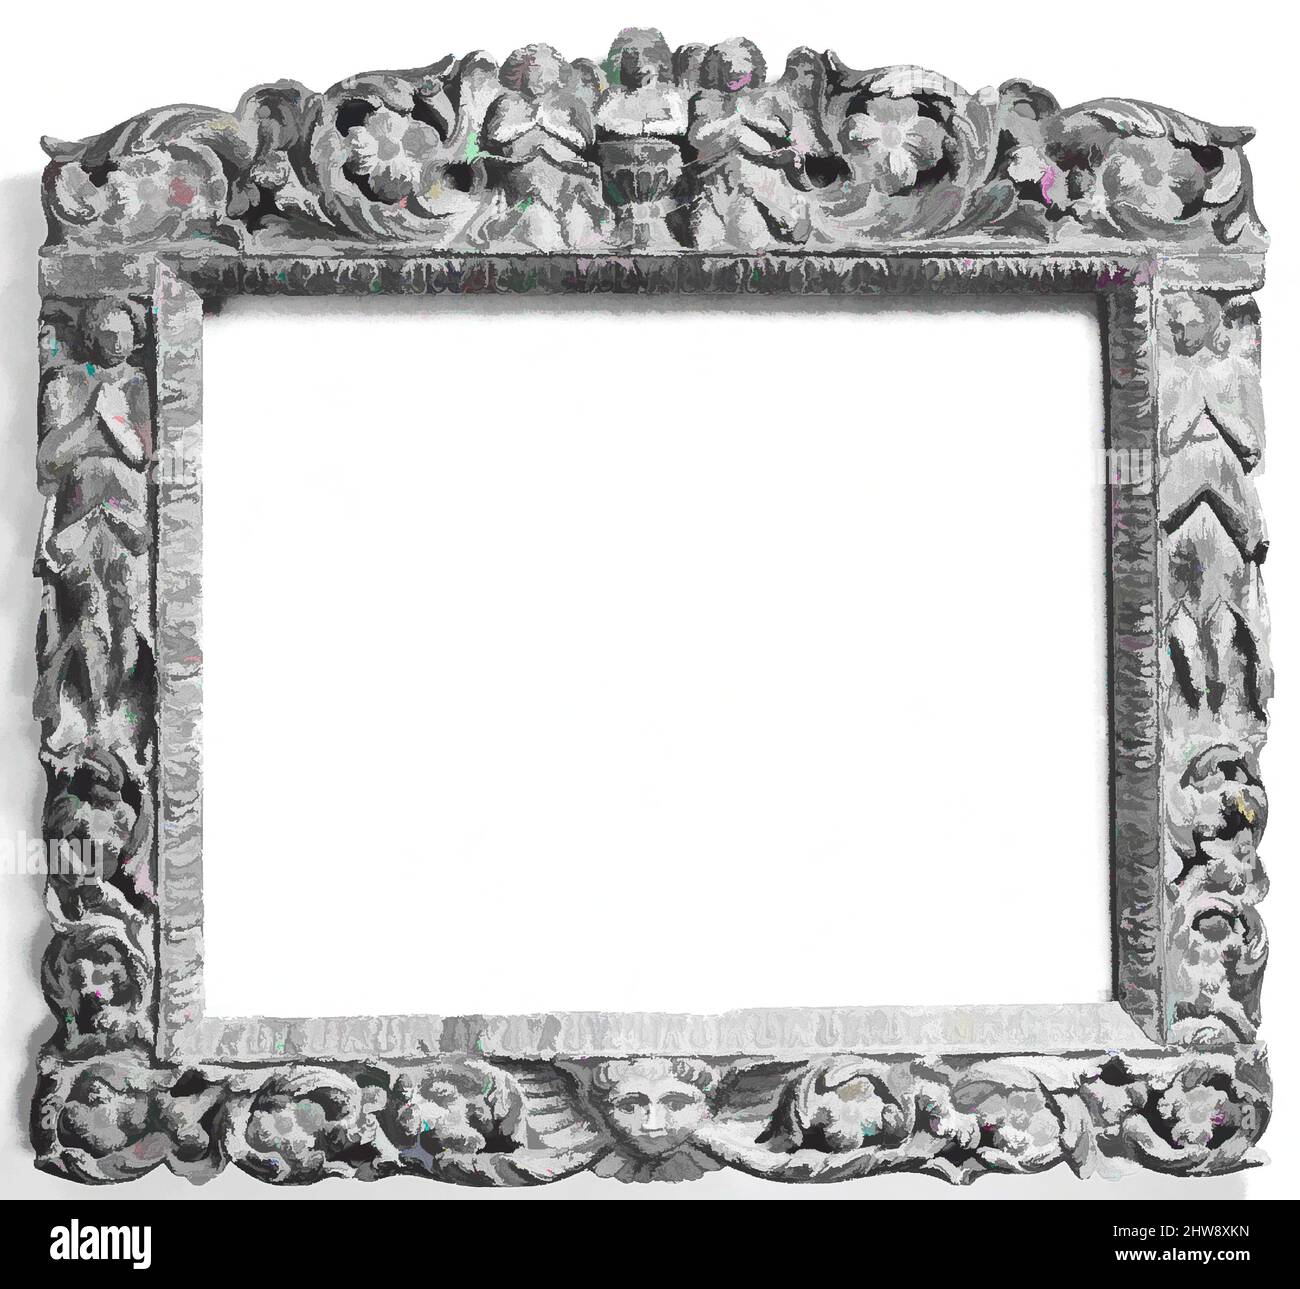 Art inspired by Corpus frame, 1950–70, style Lombardy, 17th century, American, United States, Pine back frame with poplar upper moldings., 61 x 67.2, 38 x 49.5, 41.2 x 52.8 cm., Frames, Classic works modernized by Artotop with a splash of modernity. Shapes, color and value, eye-catching visual impact on art. Emotions through freedom of artworks in a contemporary way. A timeless message pursuing a wildly creative new direction. Artists turning to the digital medium and creating the Artotop NFT Stock Photo